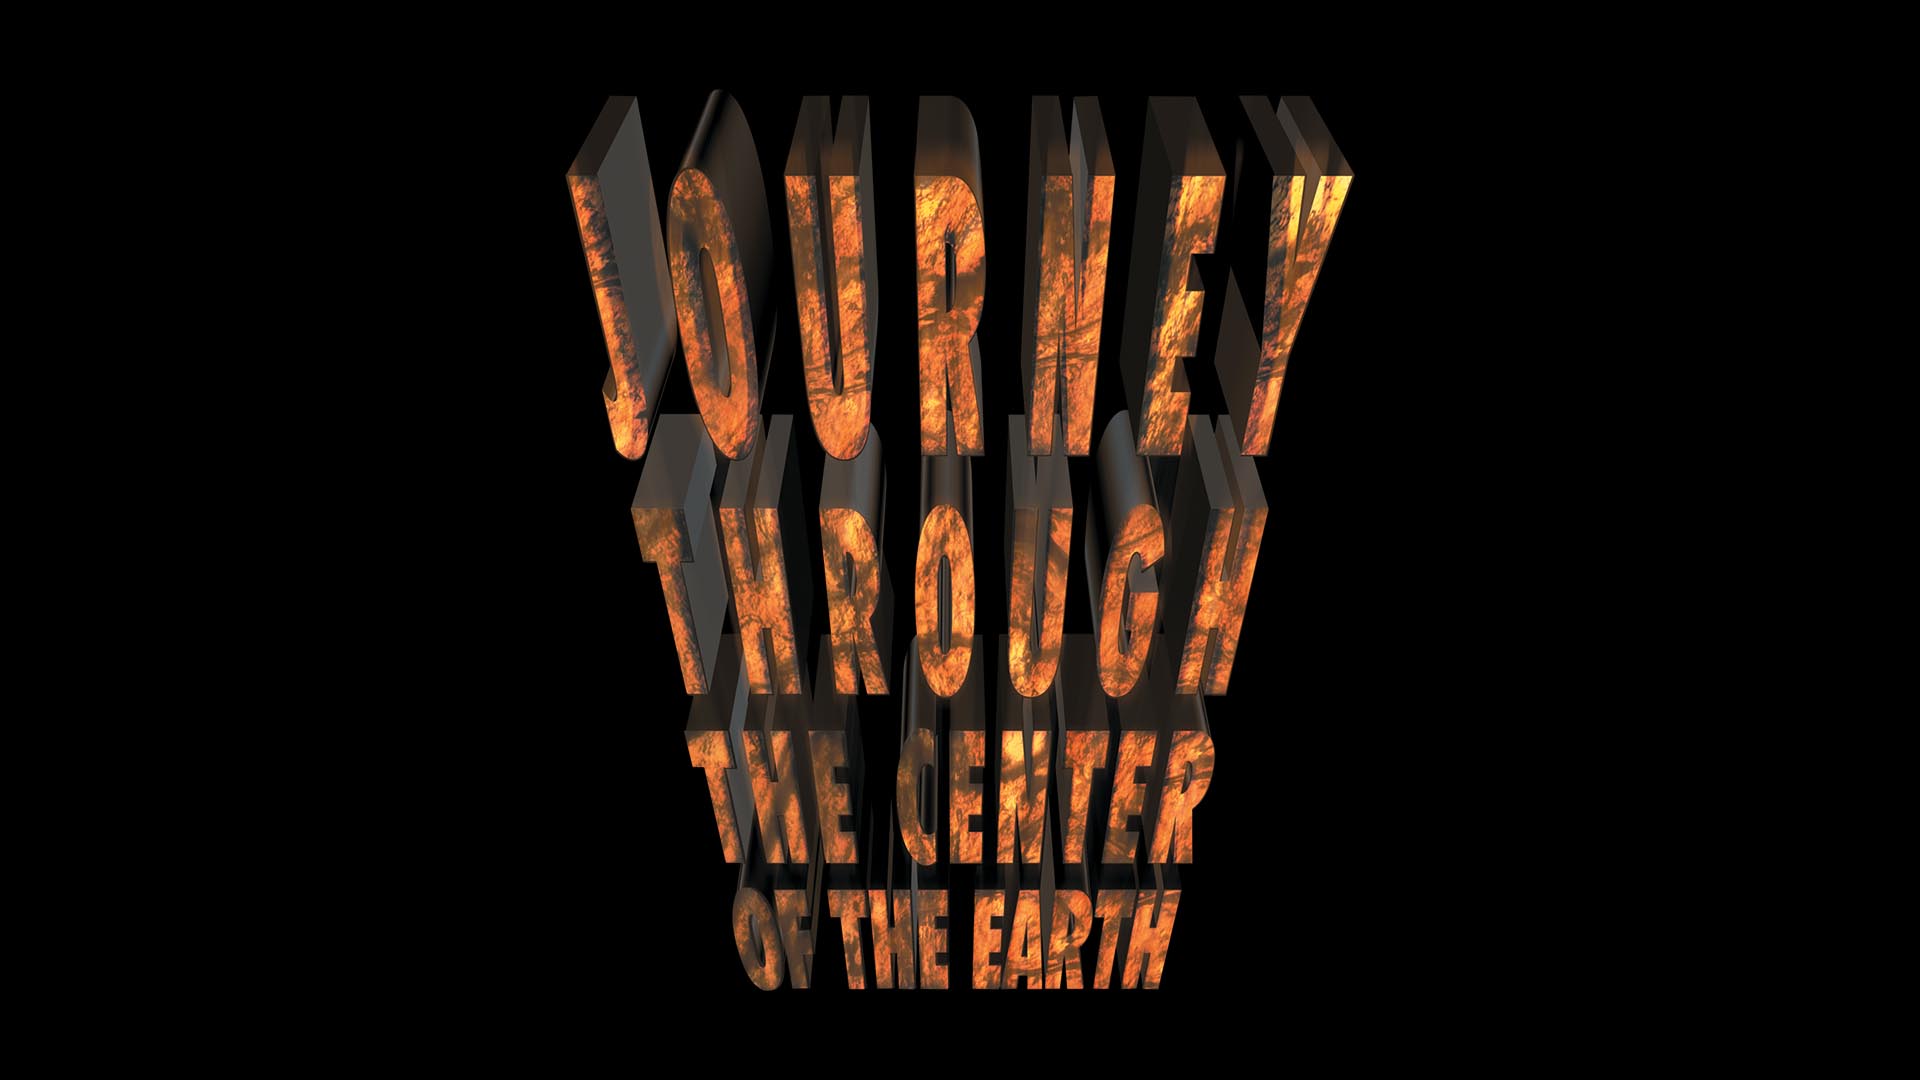 JOURNEY THROUGH THE CENTRE OF THE EARTH